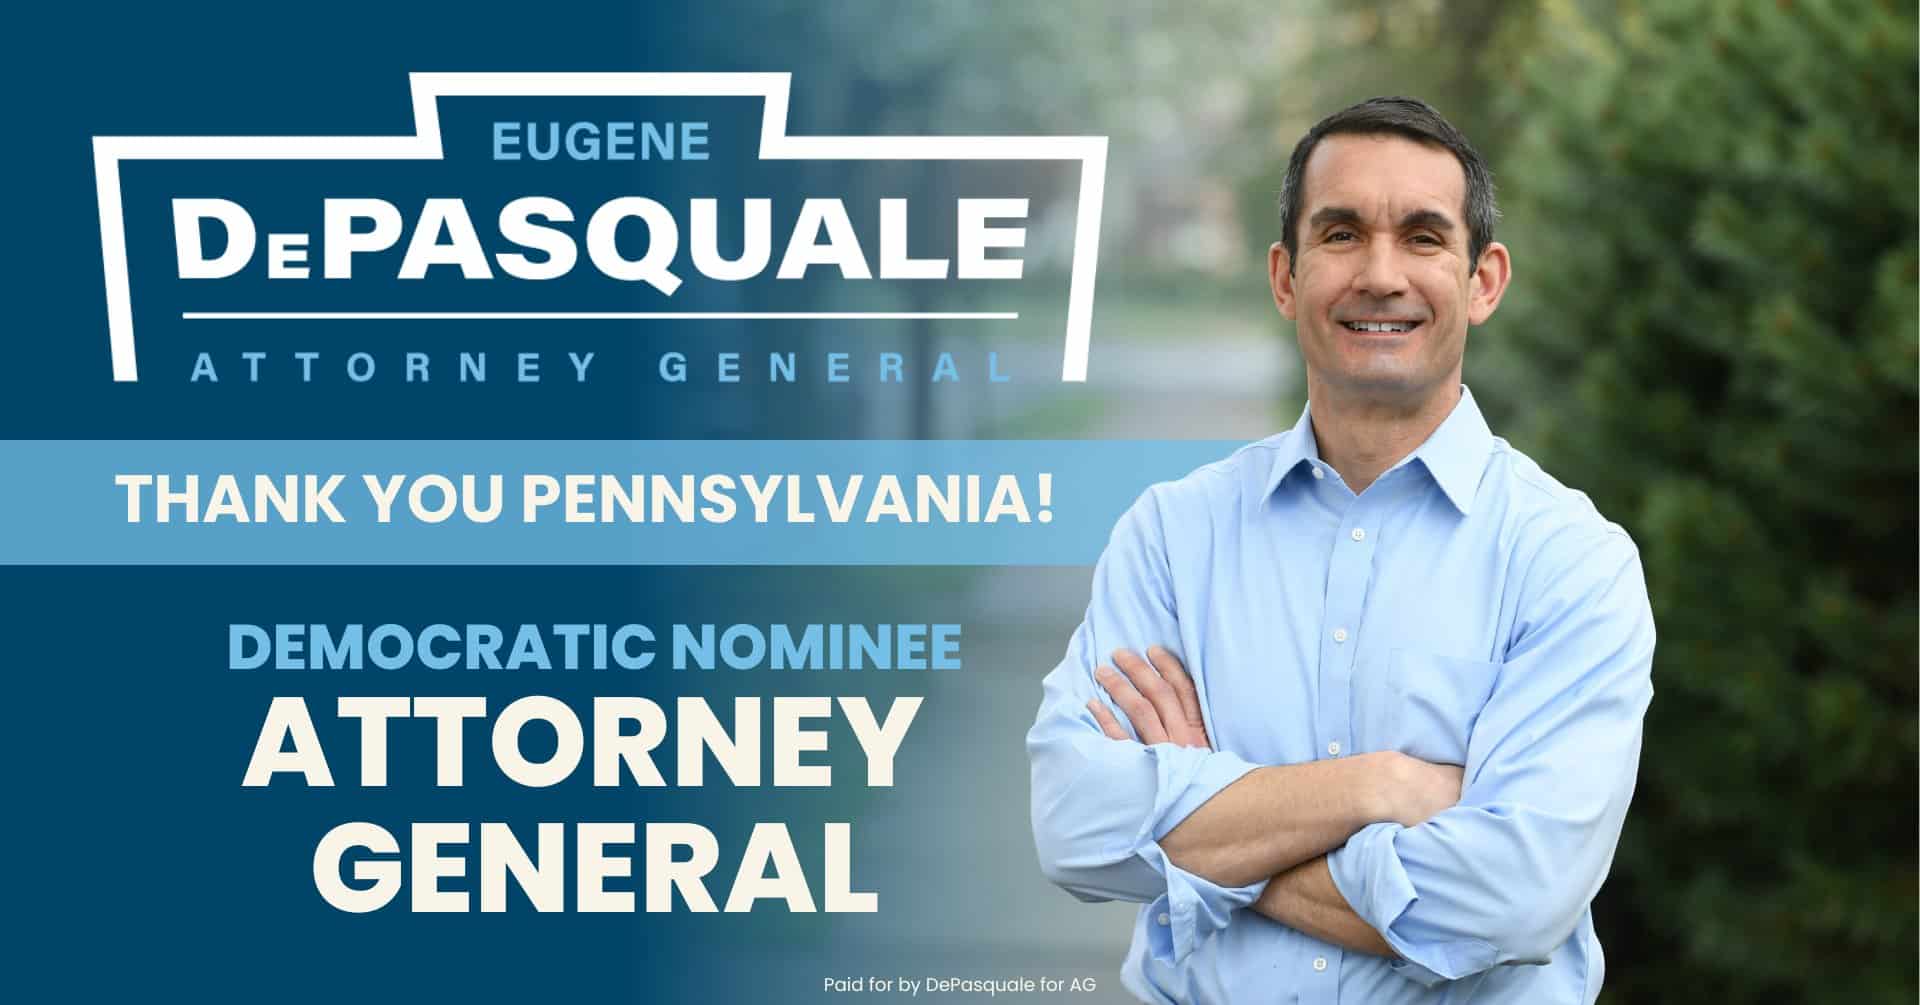 Eugene DePasquale wins Democratic primary for Pa. attorney general!